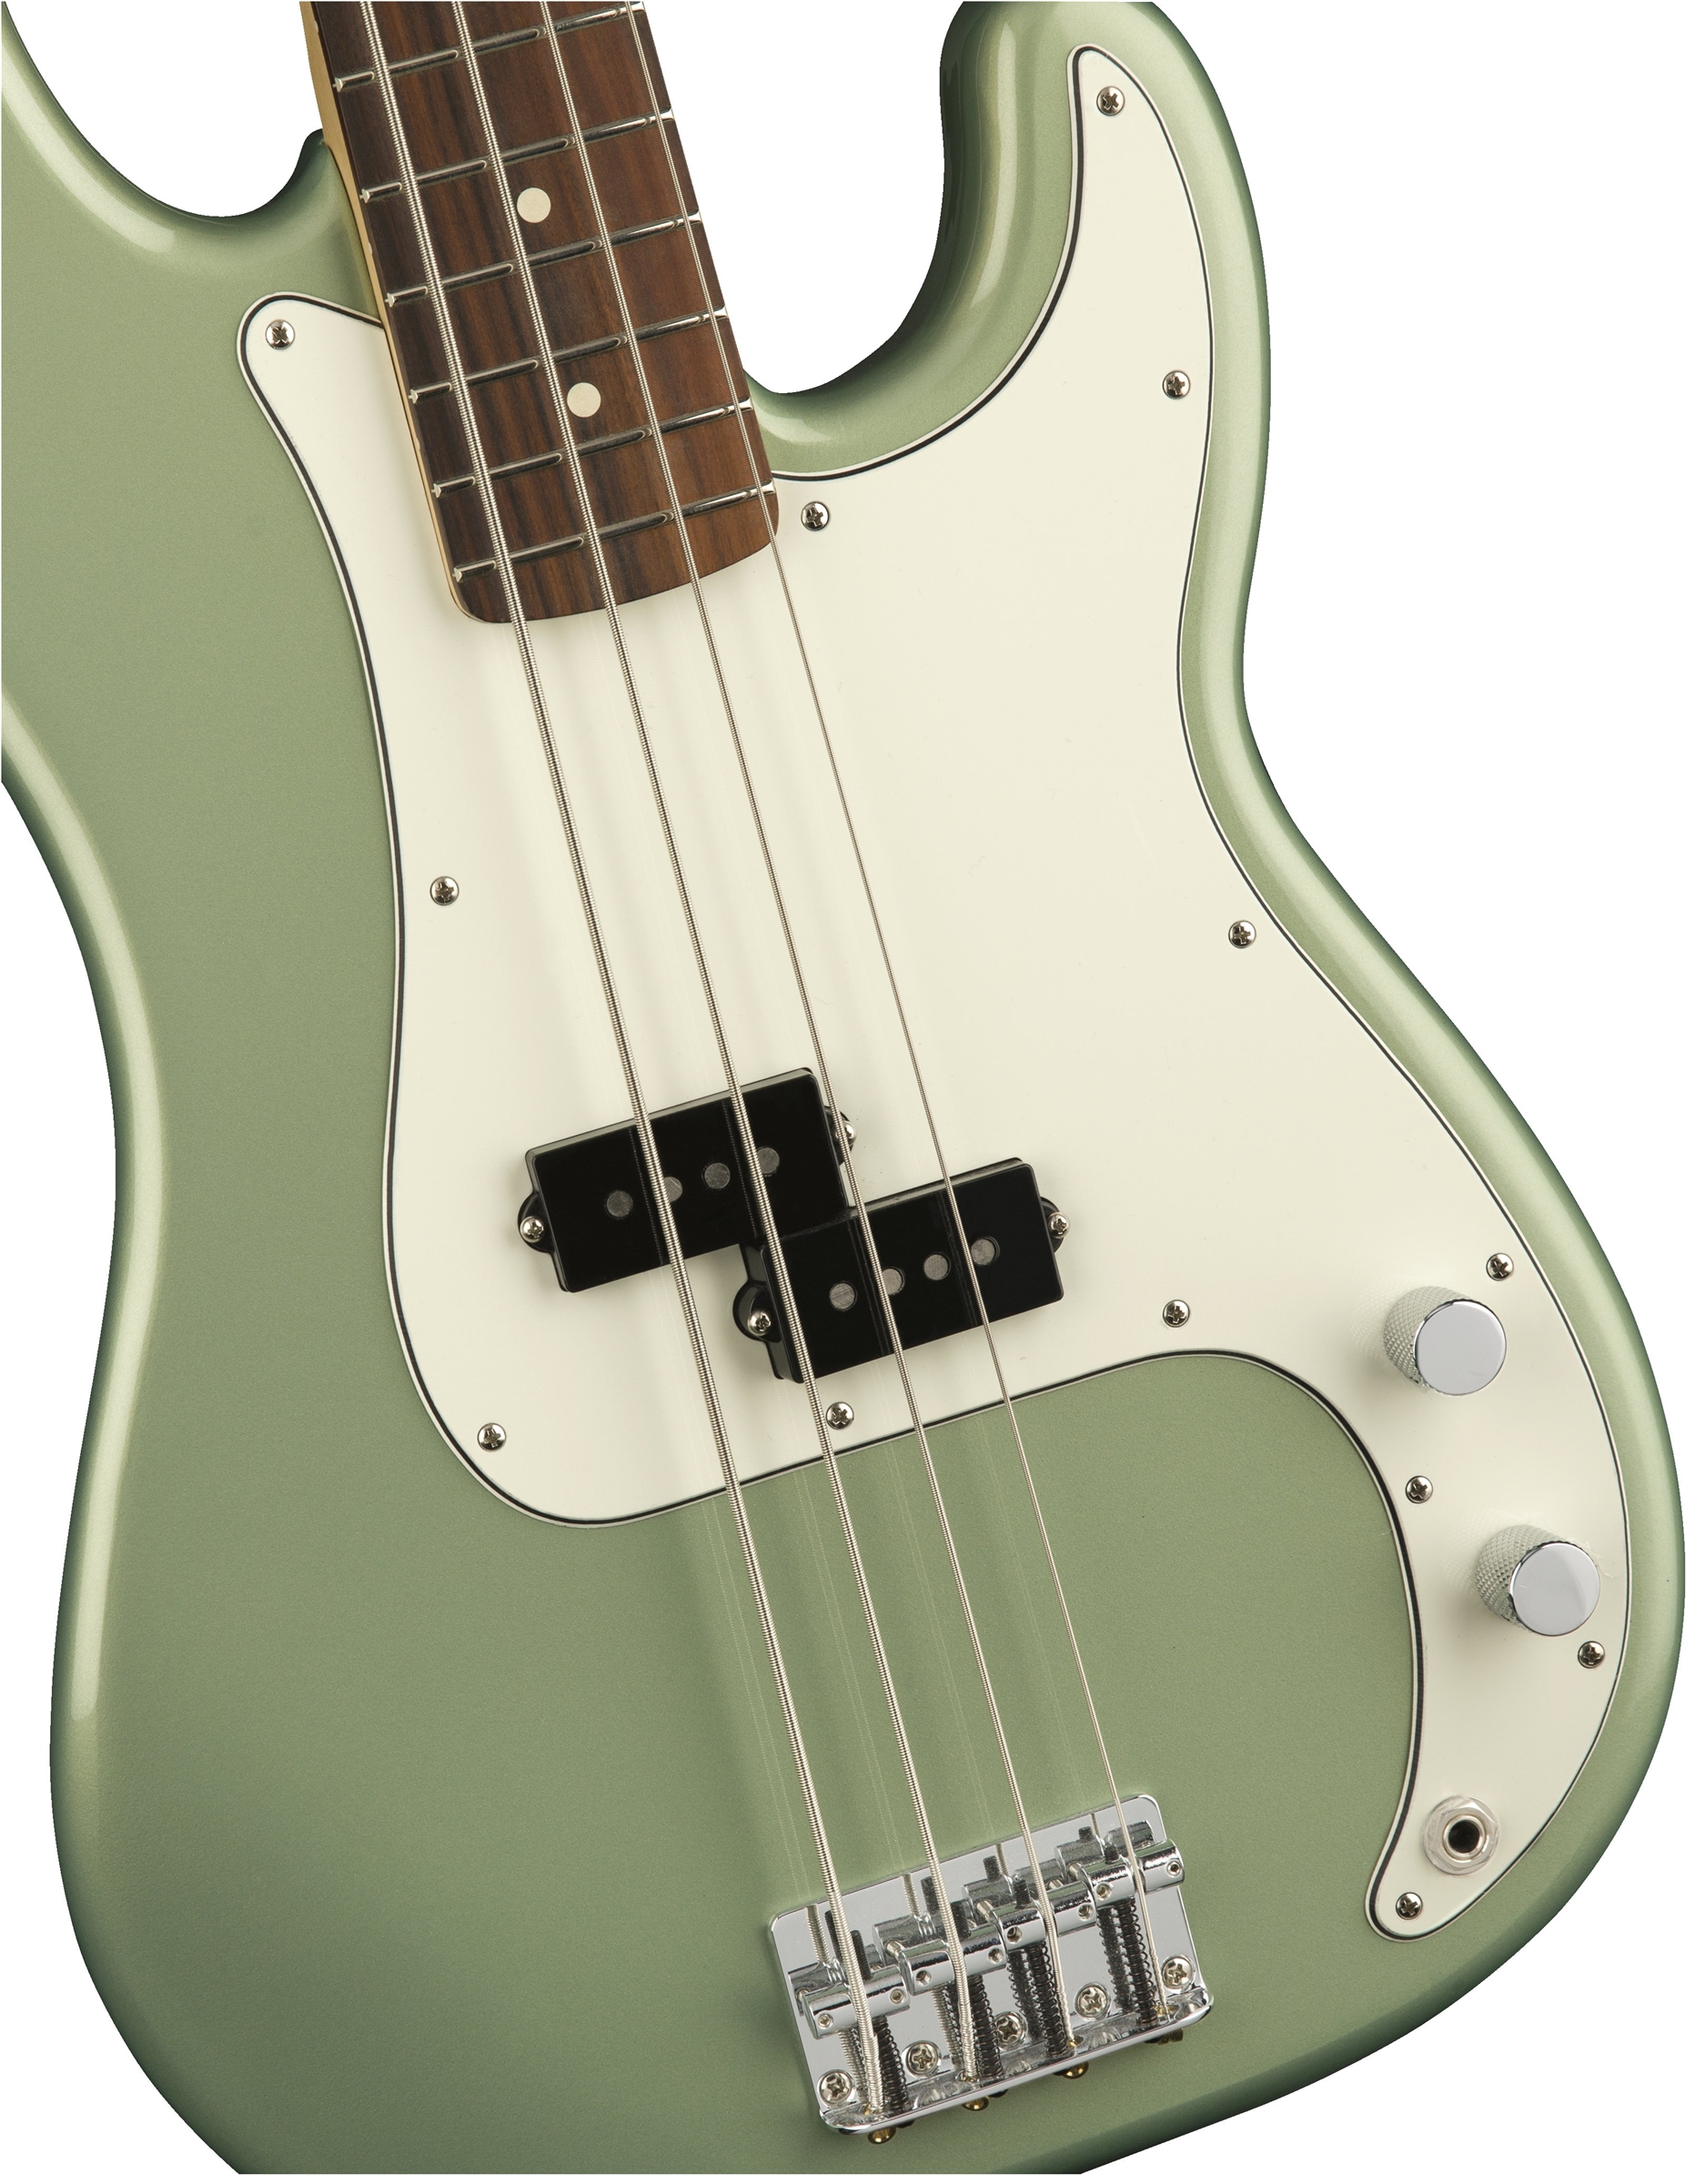 Fender Precision Bass Player Mex Pf - Sage Green Metallic - Solid body electric bass - Variation 2